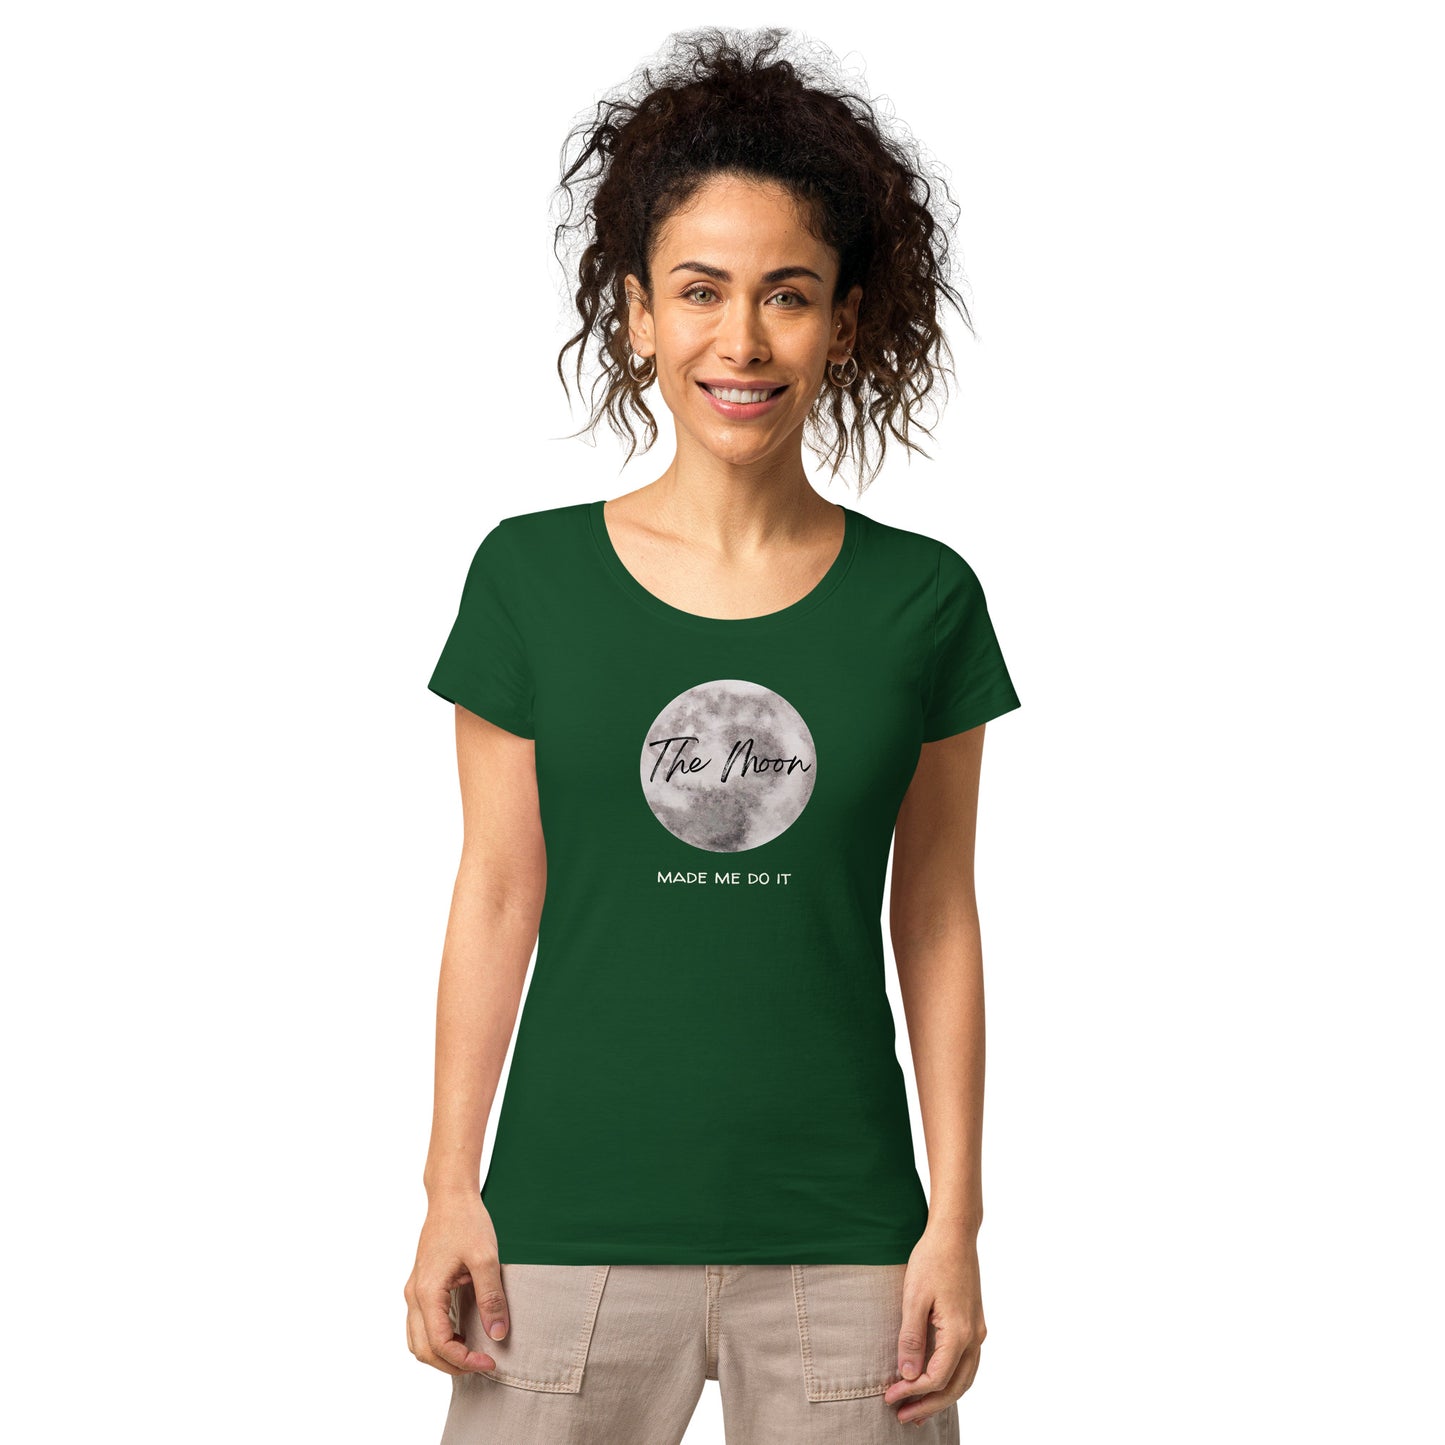 The Moon made me do it, t-shirt